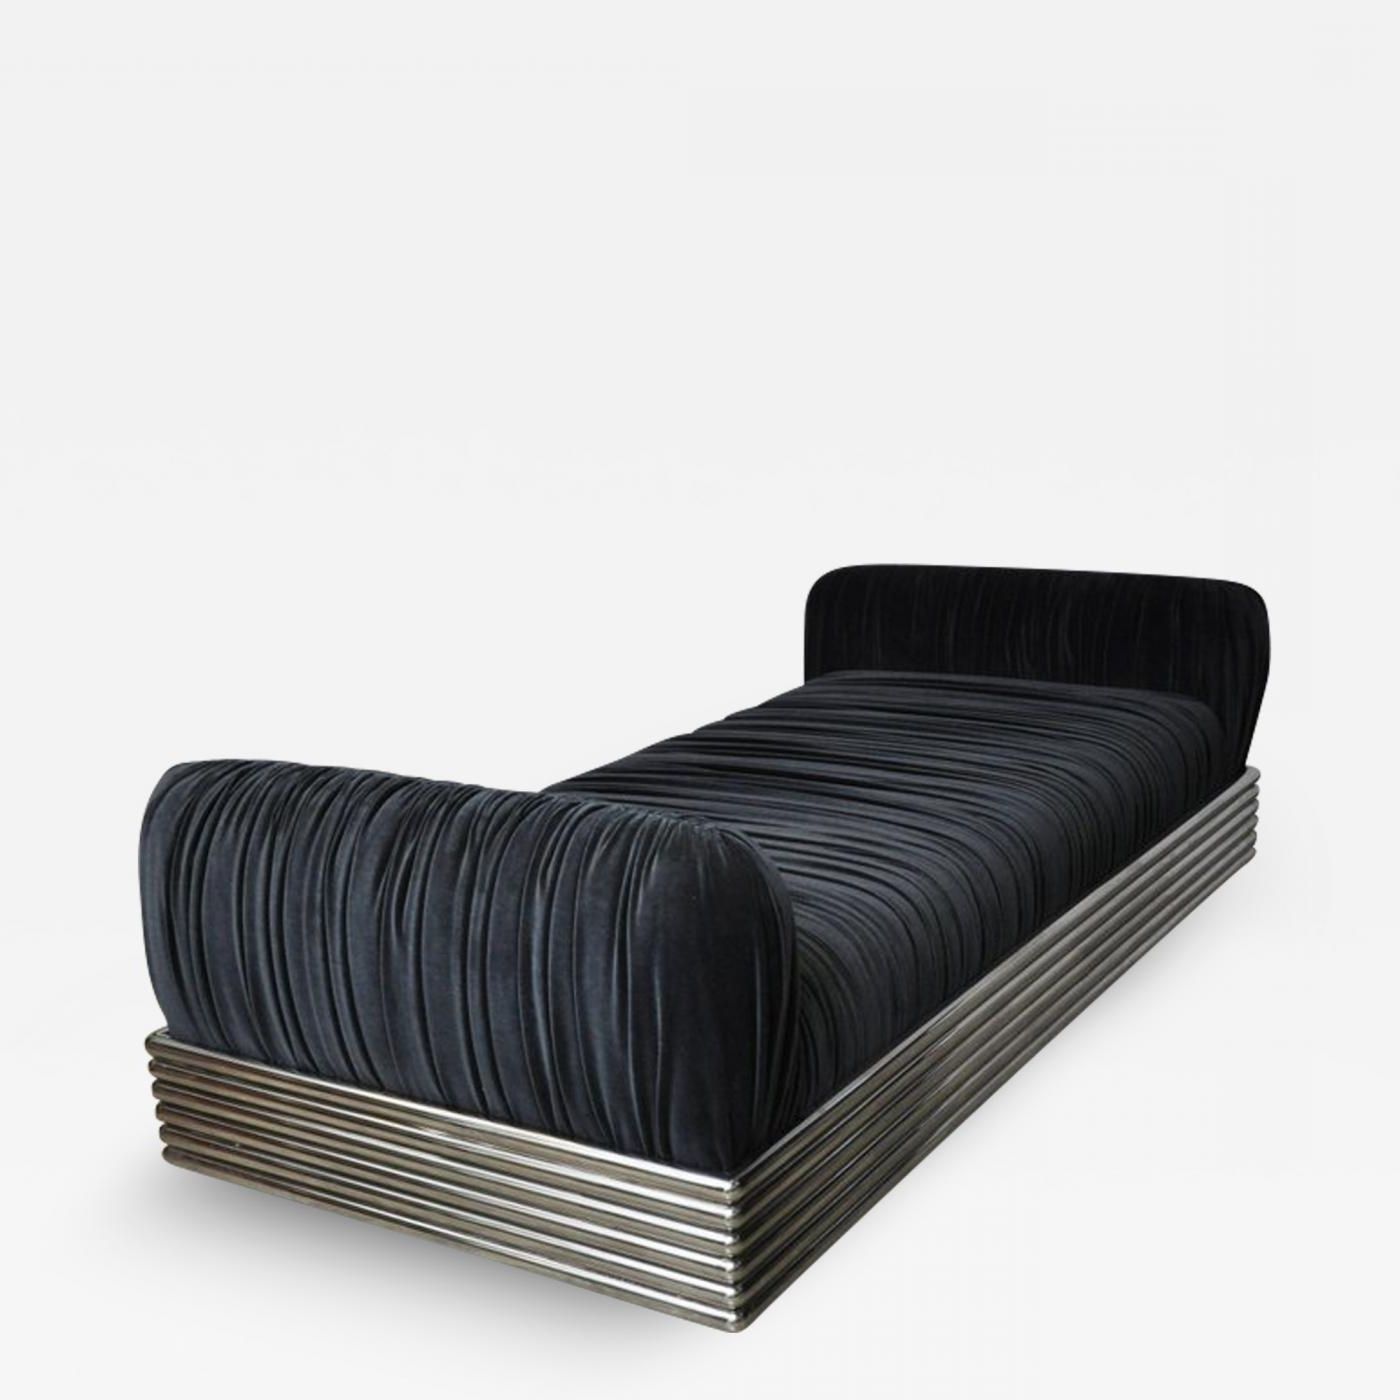 Brueton – Brueton Radiator Chaise Longue Daybed With Best And Newest Chaise Lounge Daybeds (Photo 10 of 15)